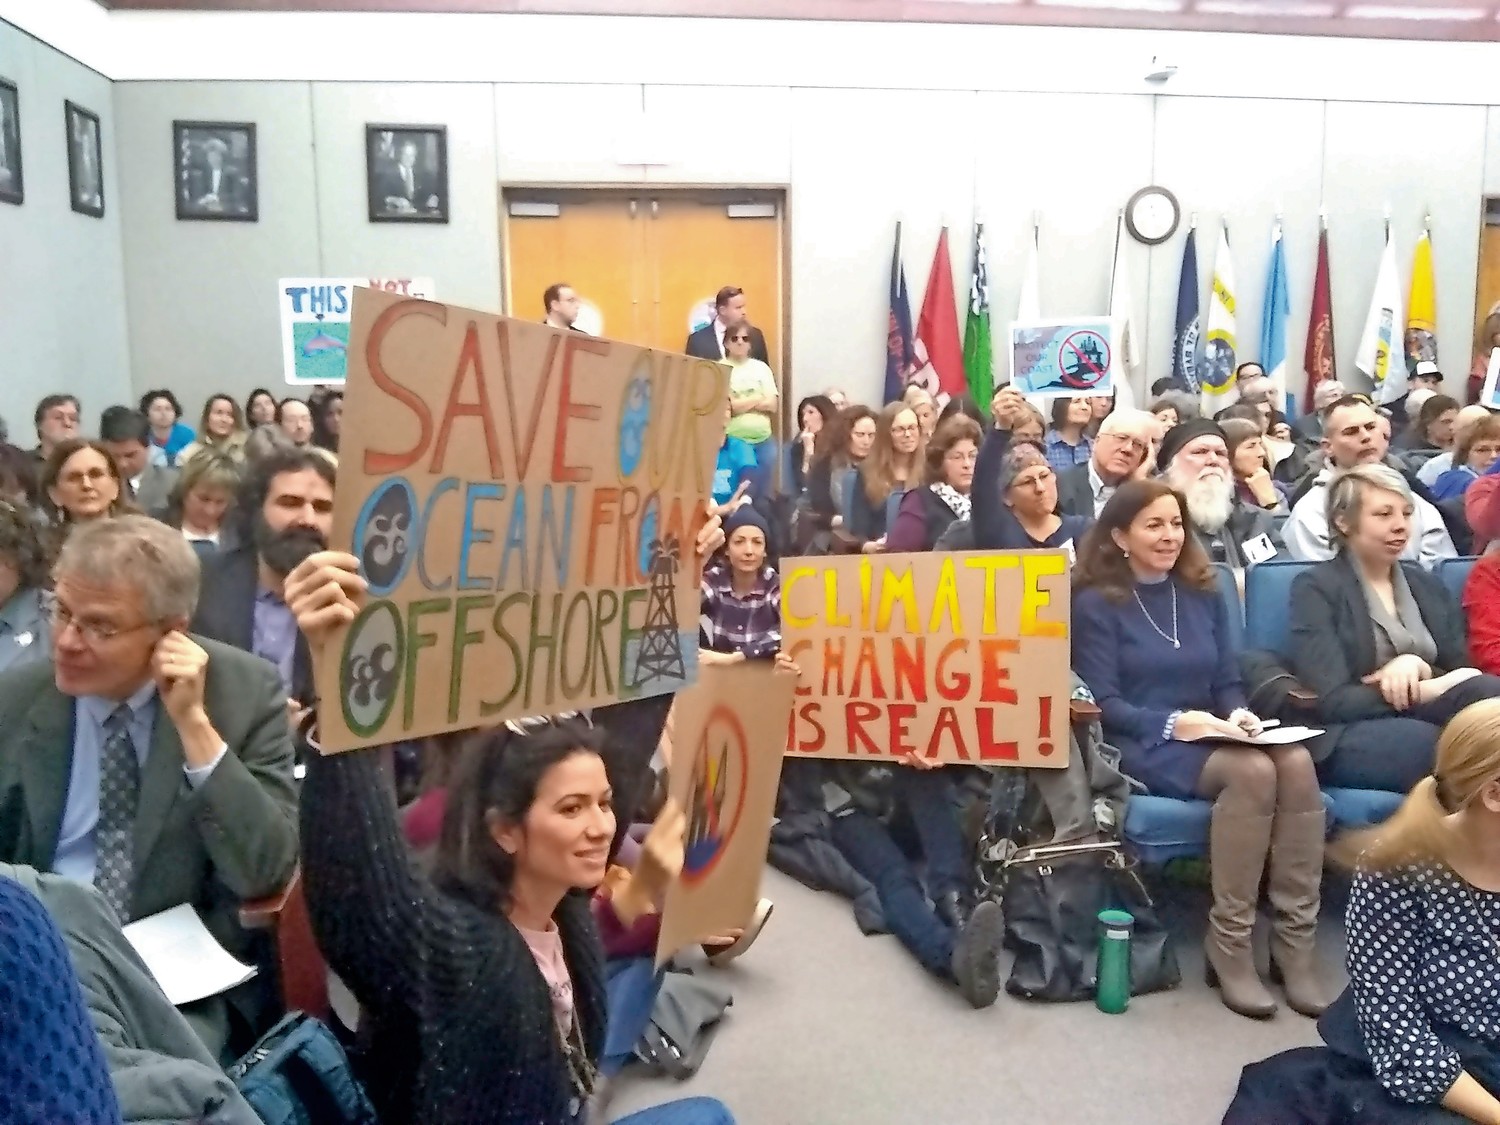 Elected officials, environmentalists and others gathered at the Suffolk County Legislature on Feb. 14 to speak against offshore drilling.